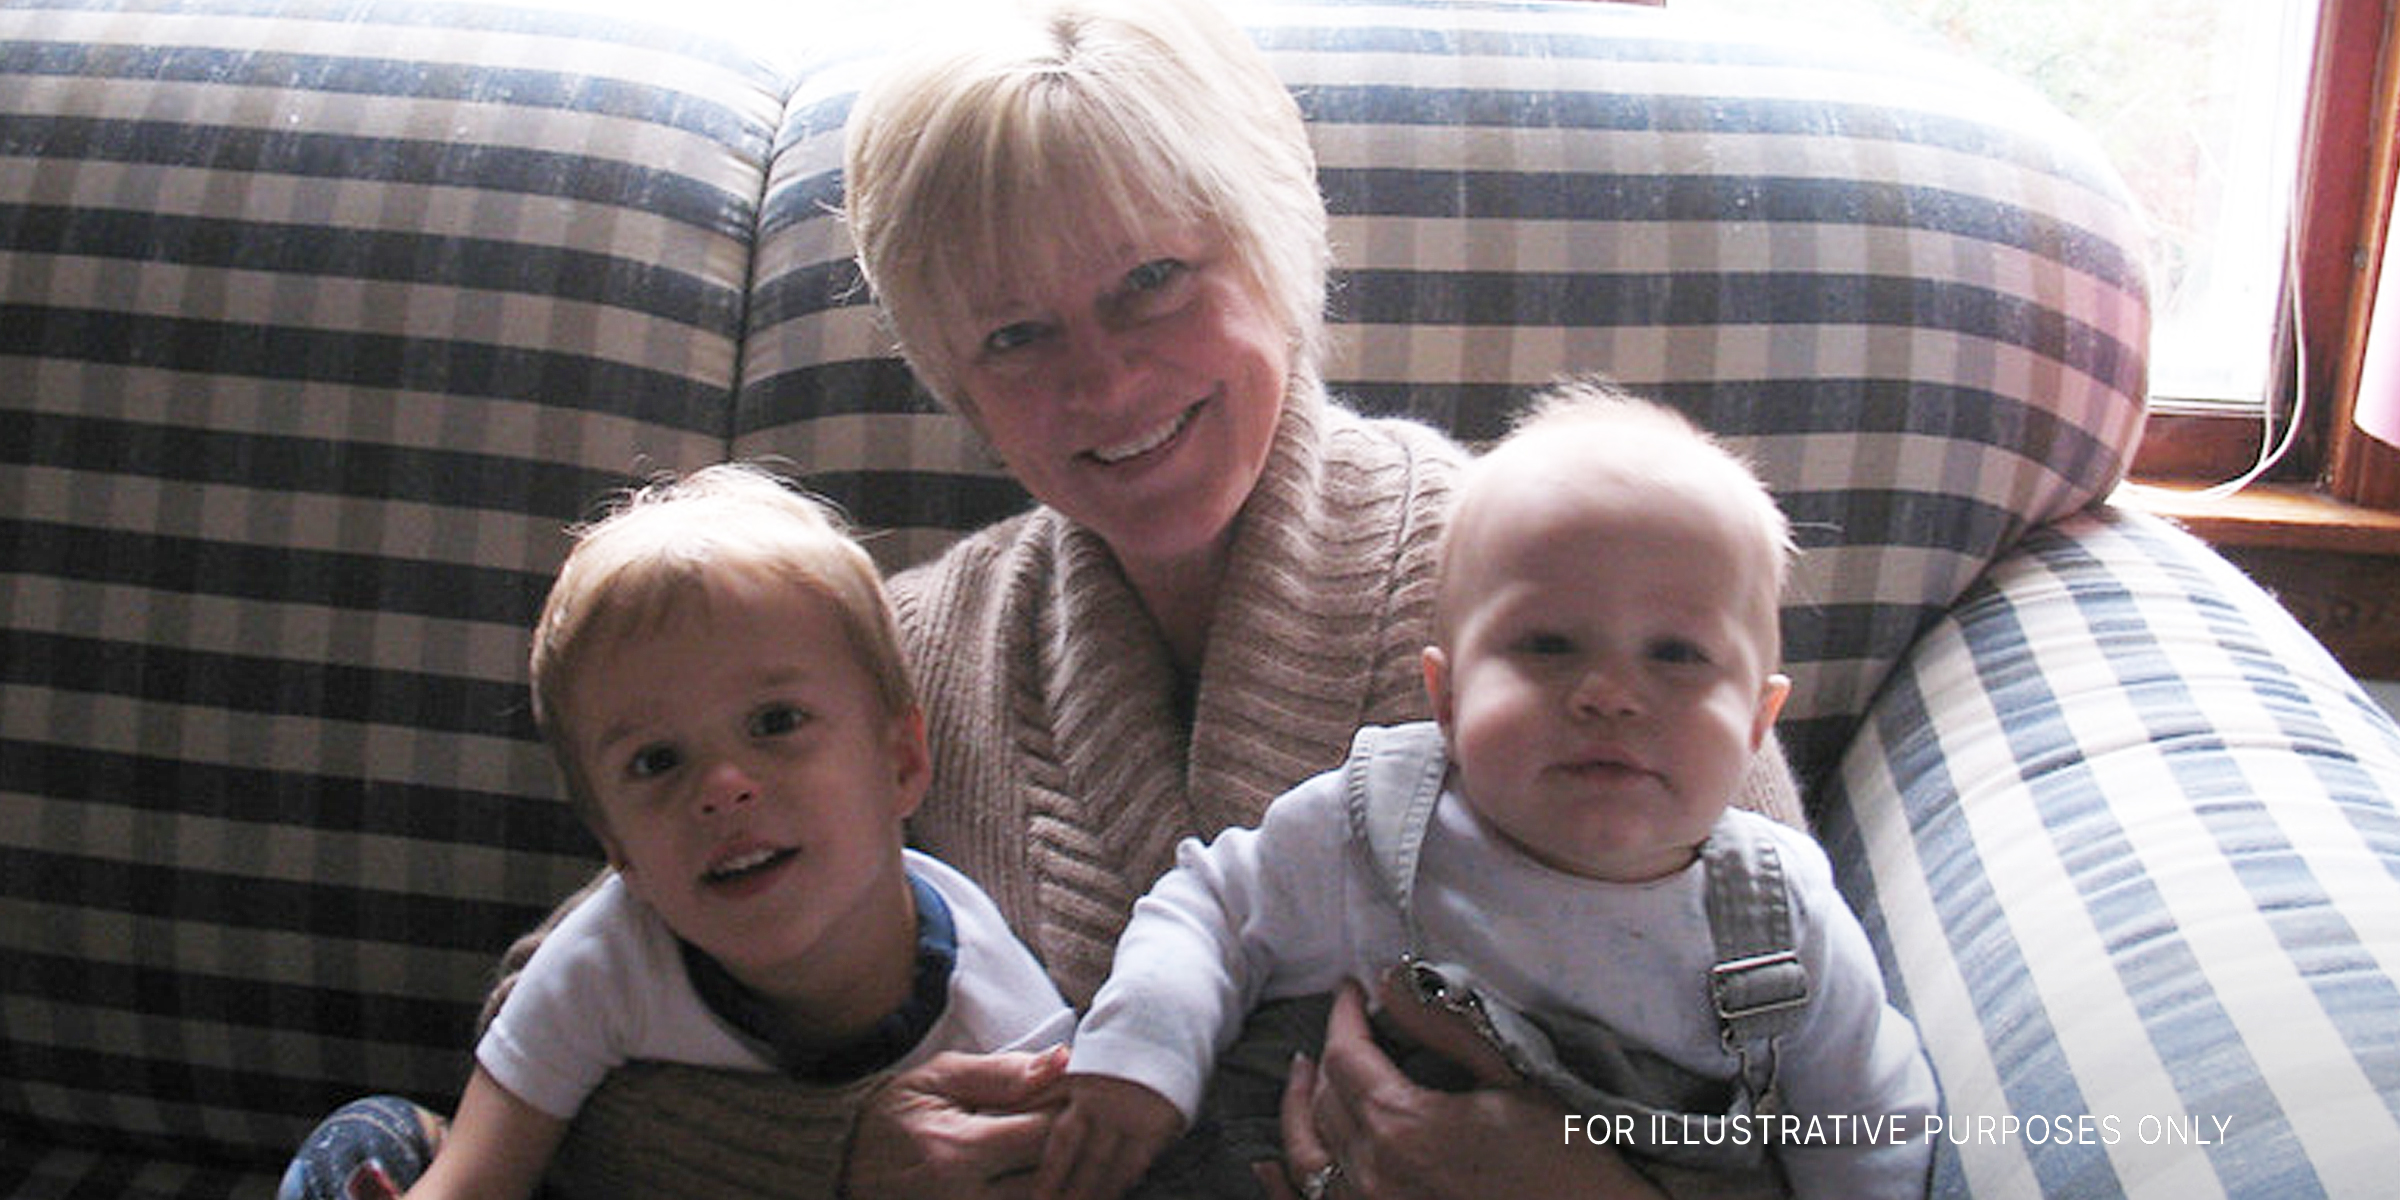 A grandmother with her two grandsons | Source: flickr.com/(CC BY-SA 2.0) by xordroyd